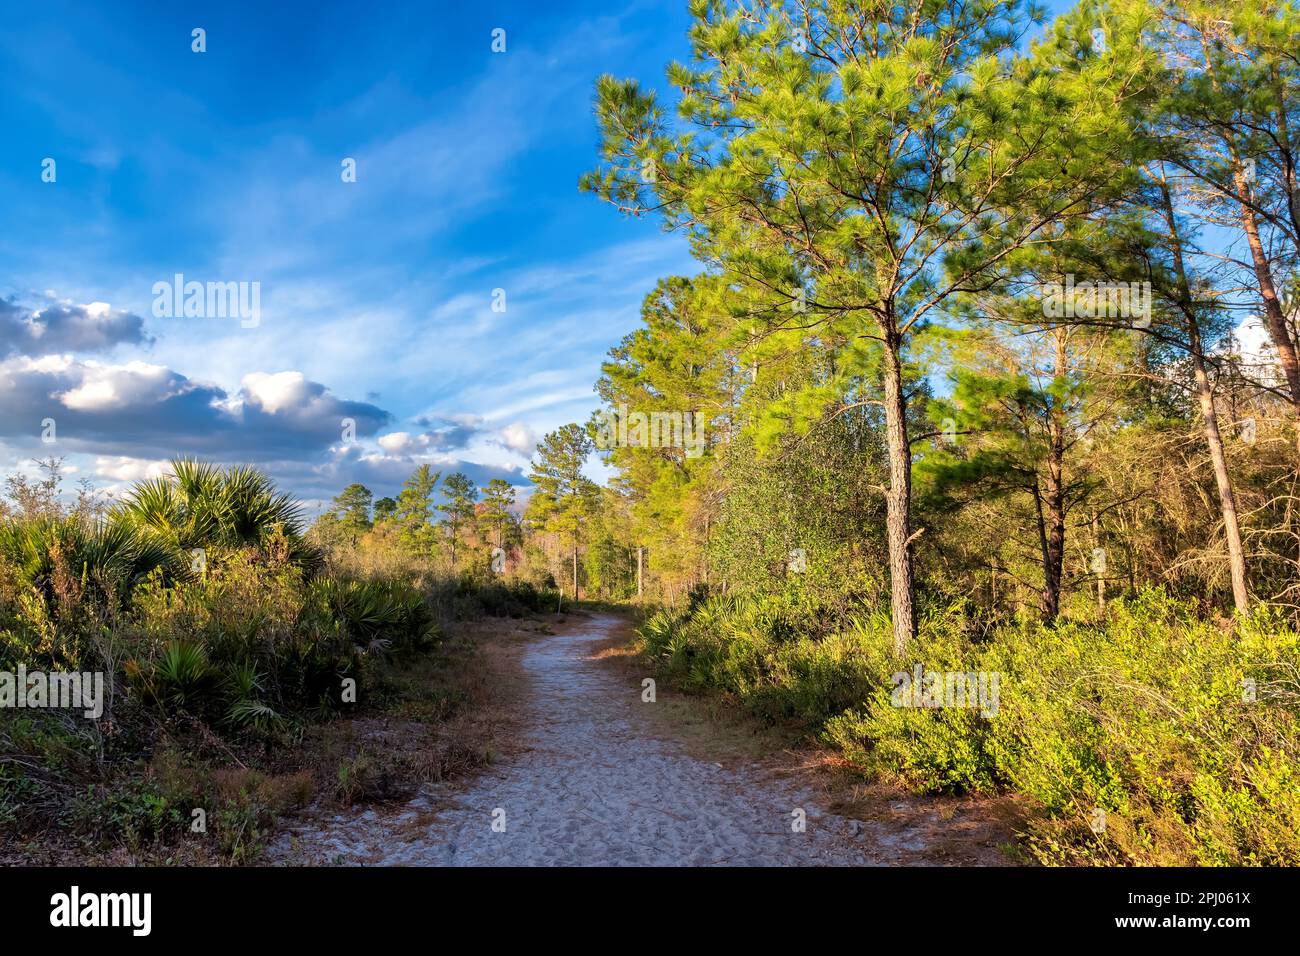 A path in the beautiful forest surrounded by pine trees and tropical trees at sunset. Stock Photo